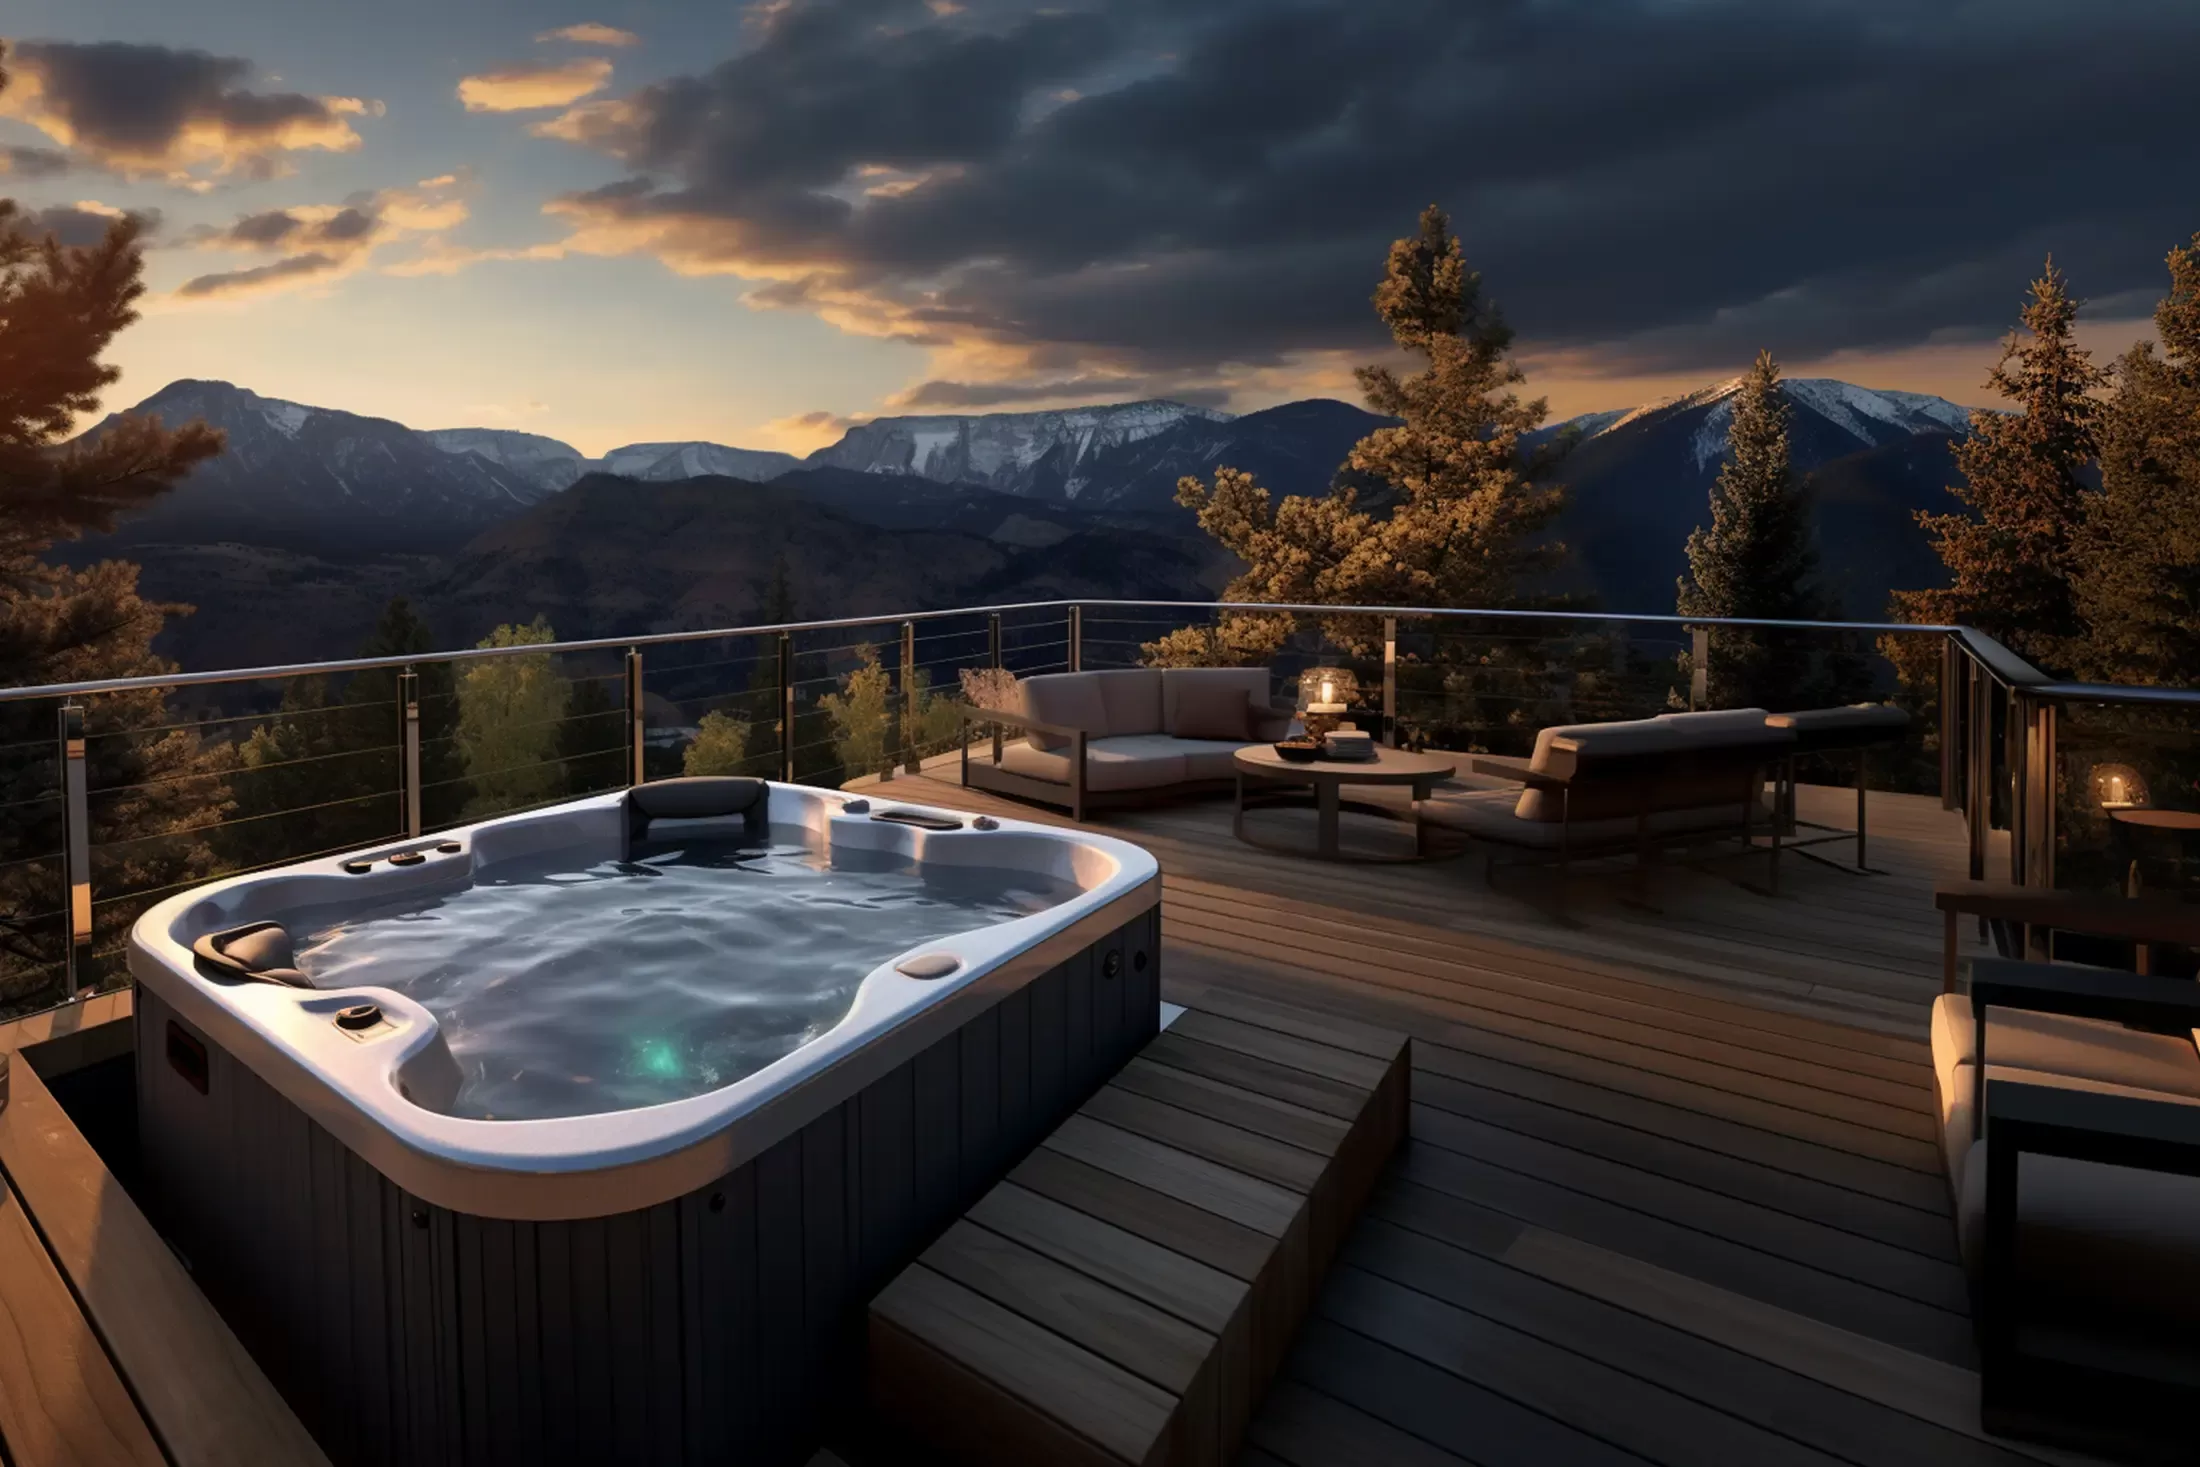 Hot tub in the outdoors setting in Colorado